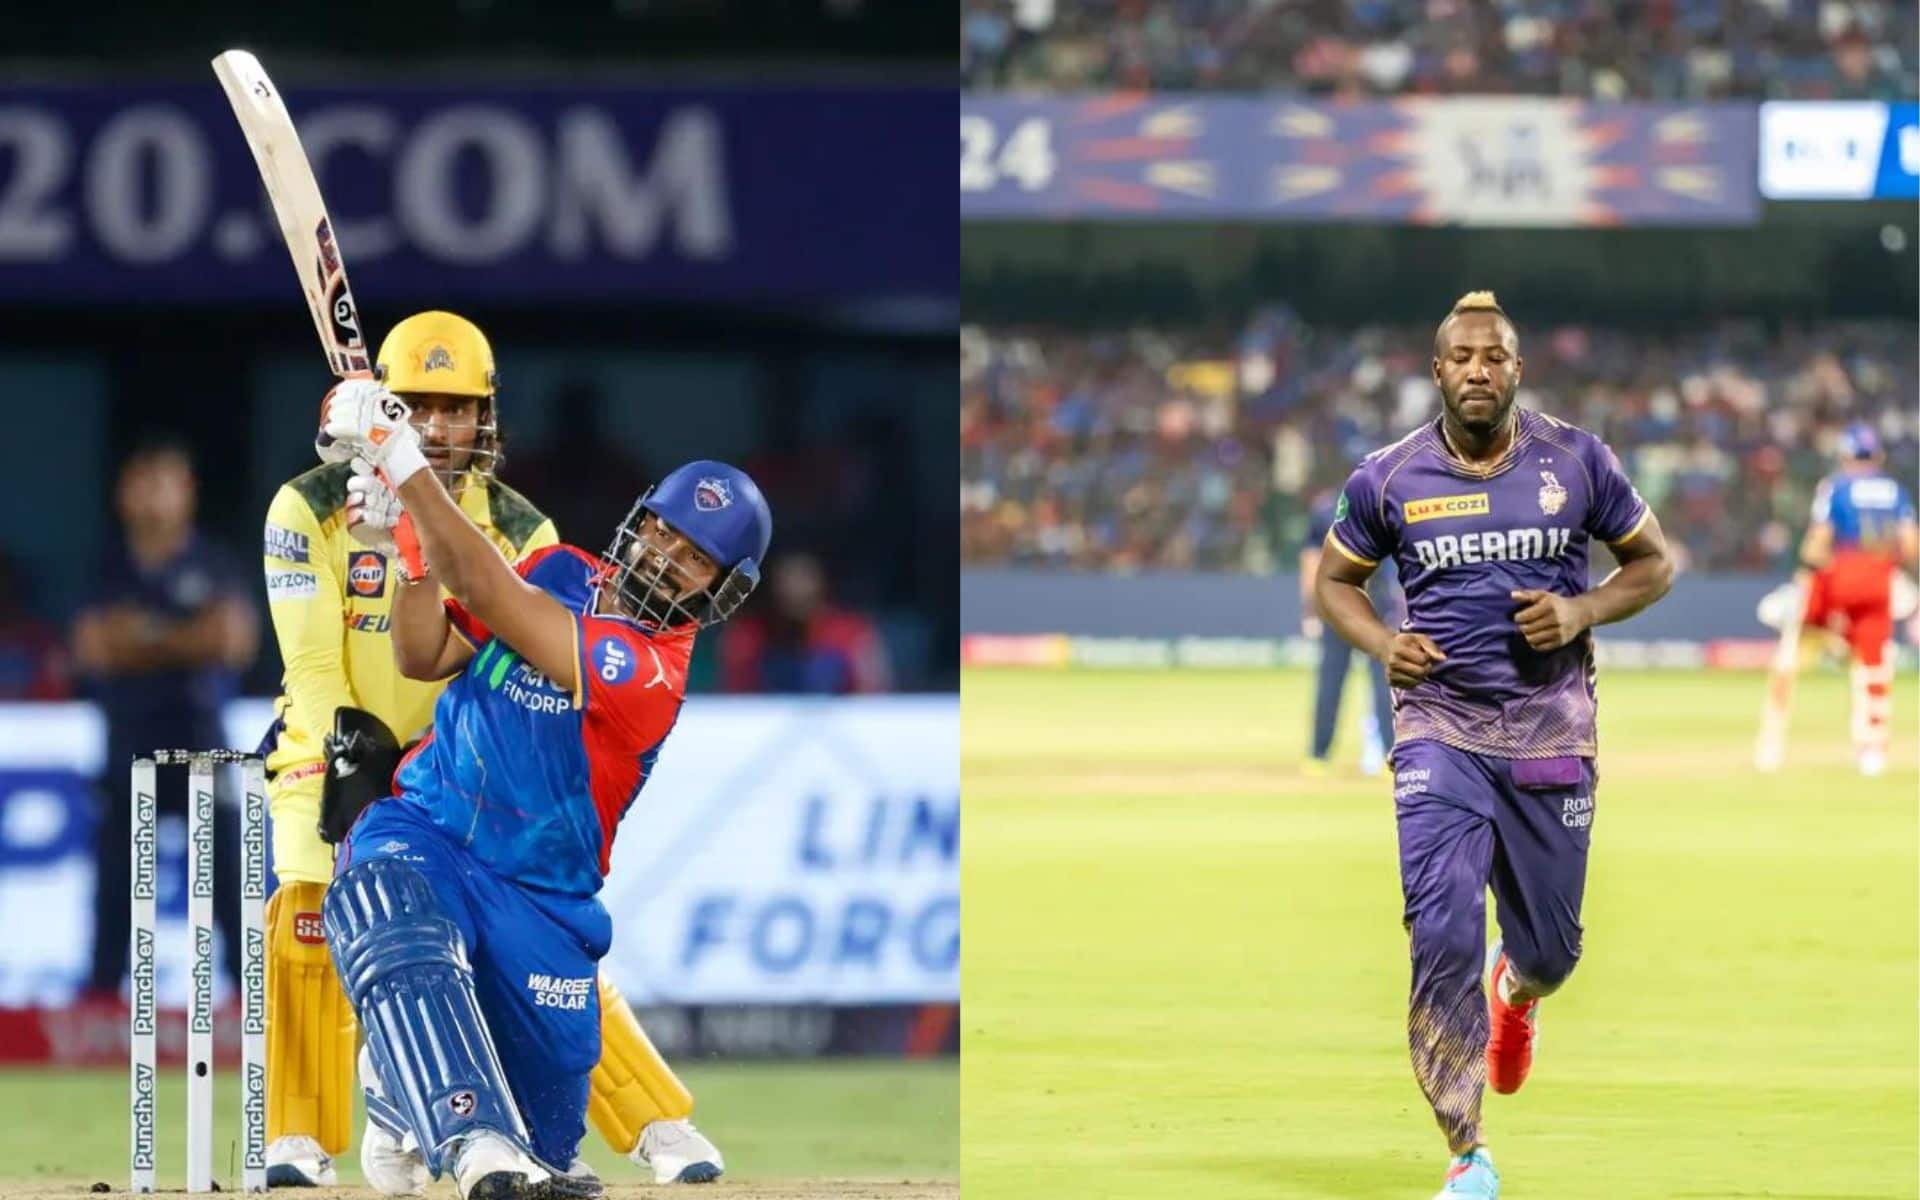 Rishabh Pant and Andre Russell could be decisive choices as C/Vc in the match [iplt20.com]